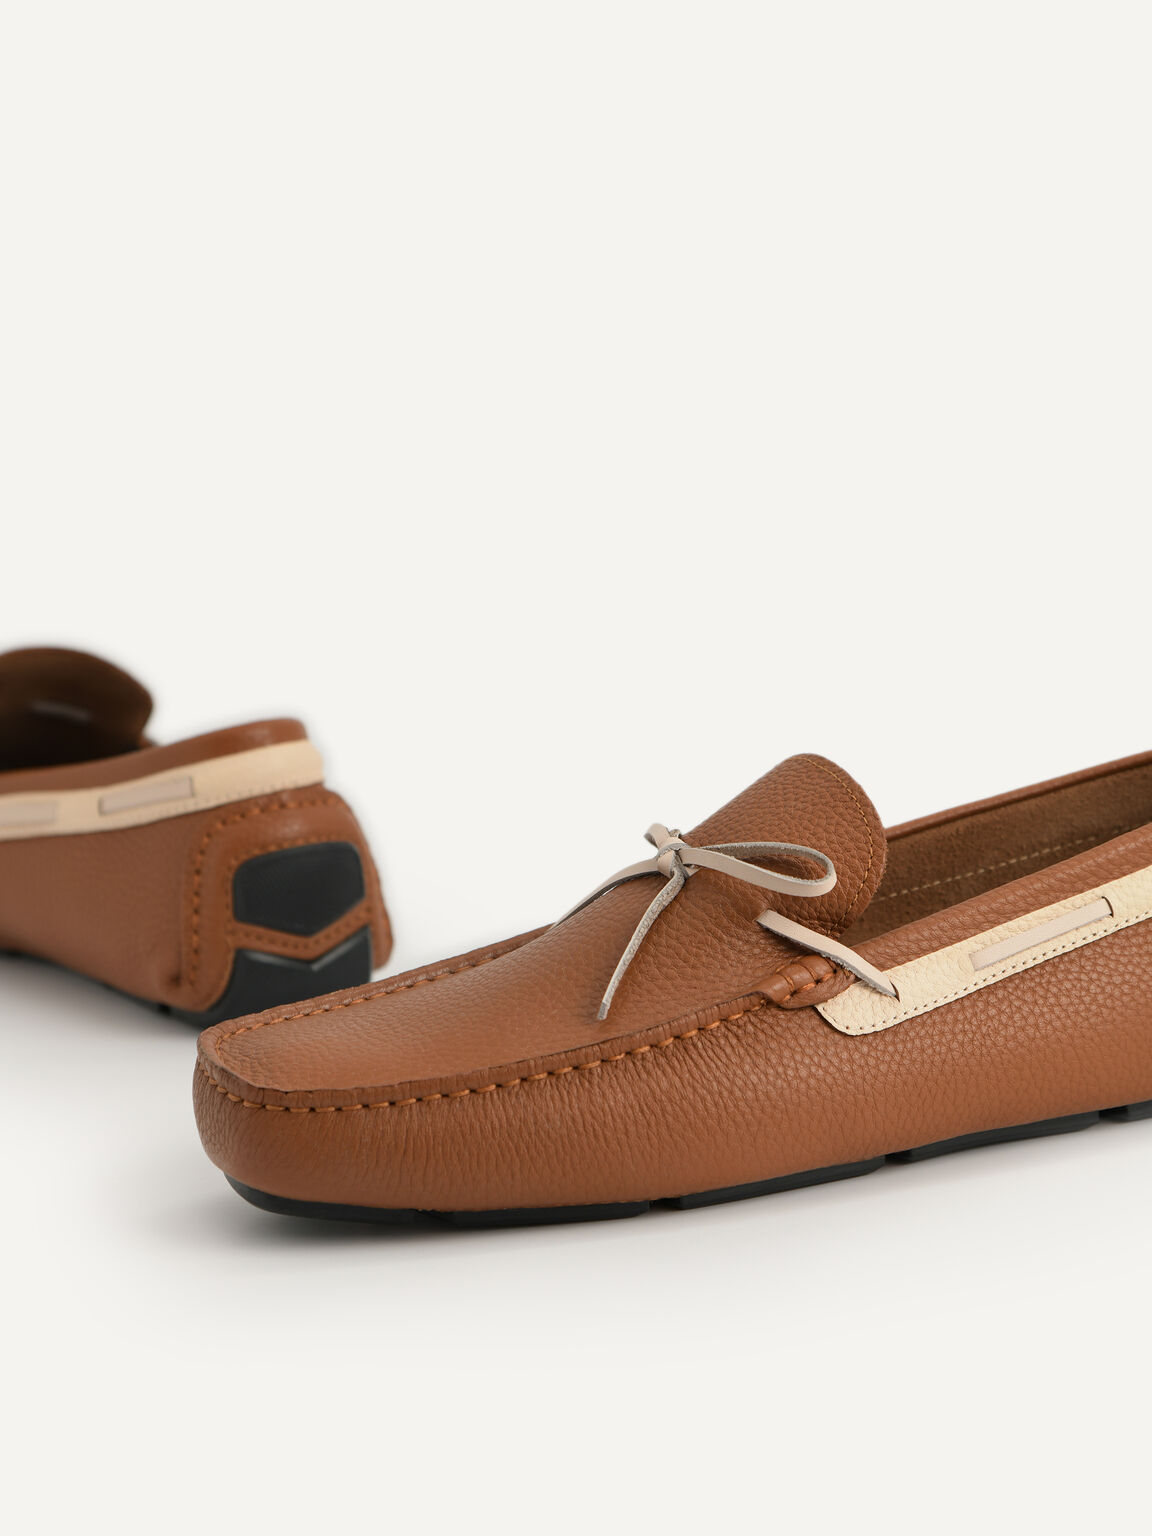 Textured Leather Moccasins with Bow, Brown, hi-res